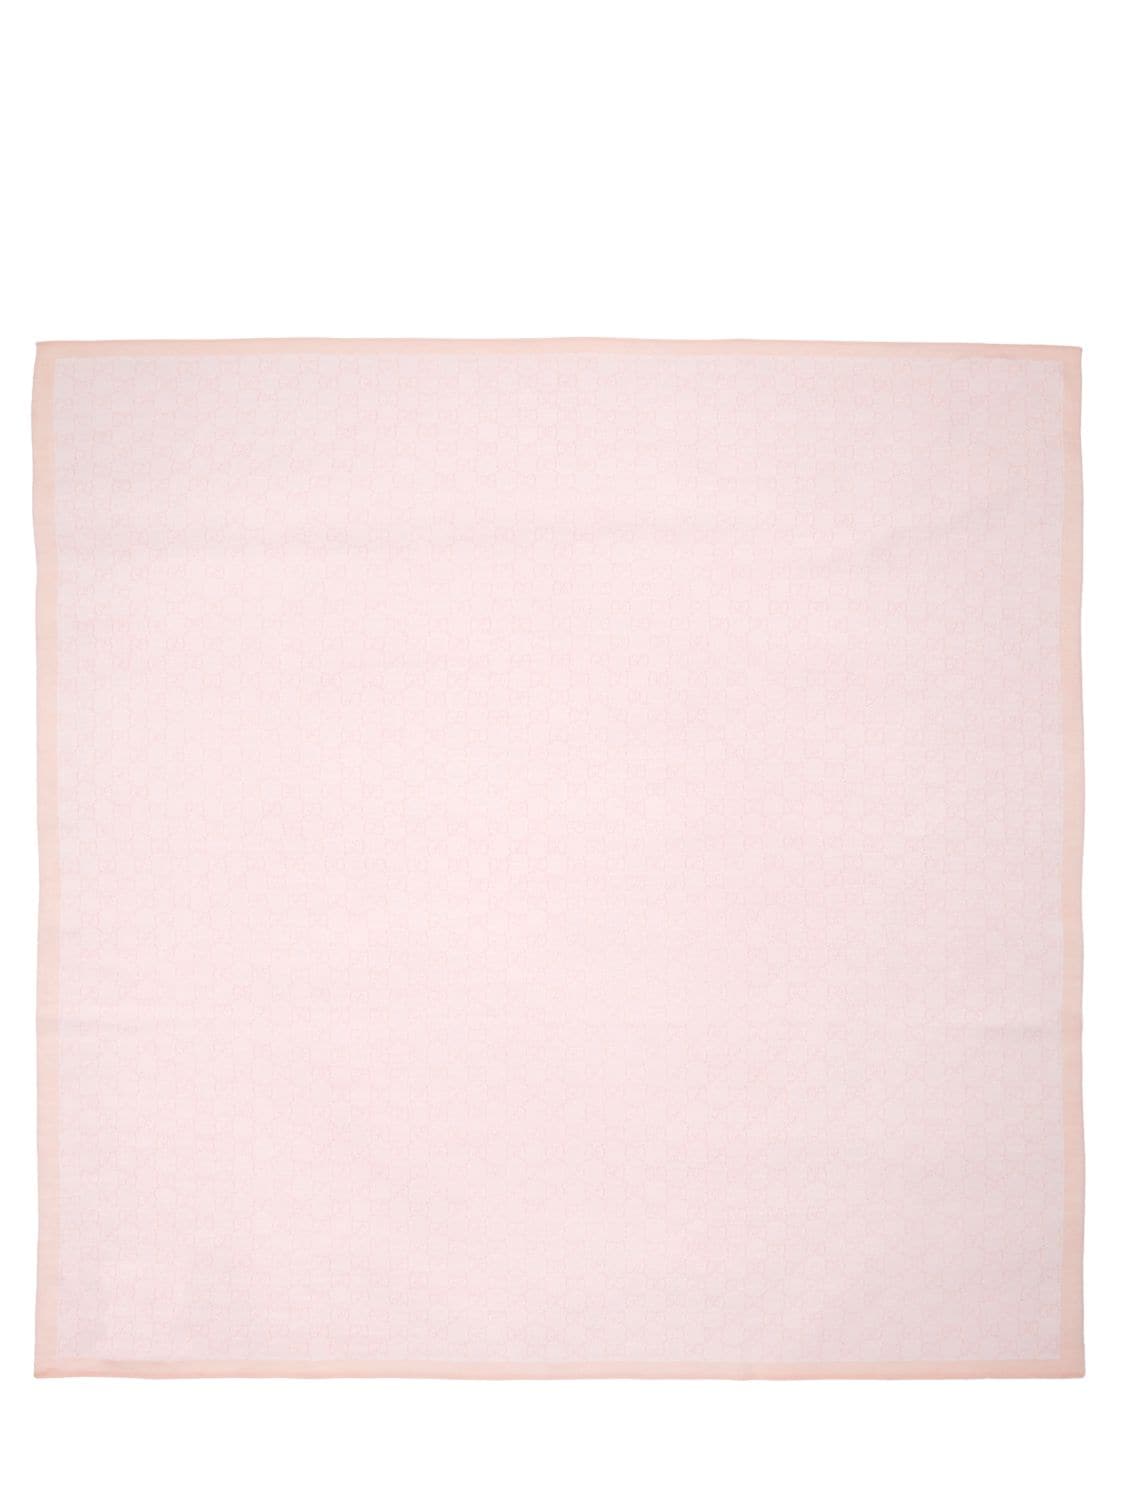 Gucci Gg Supreme Jacquard Wool Knit Blanket In Pink